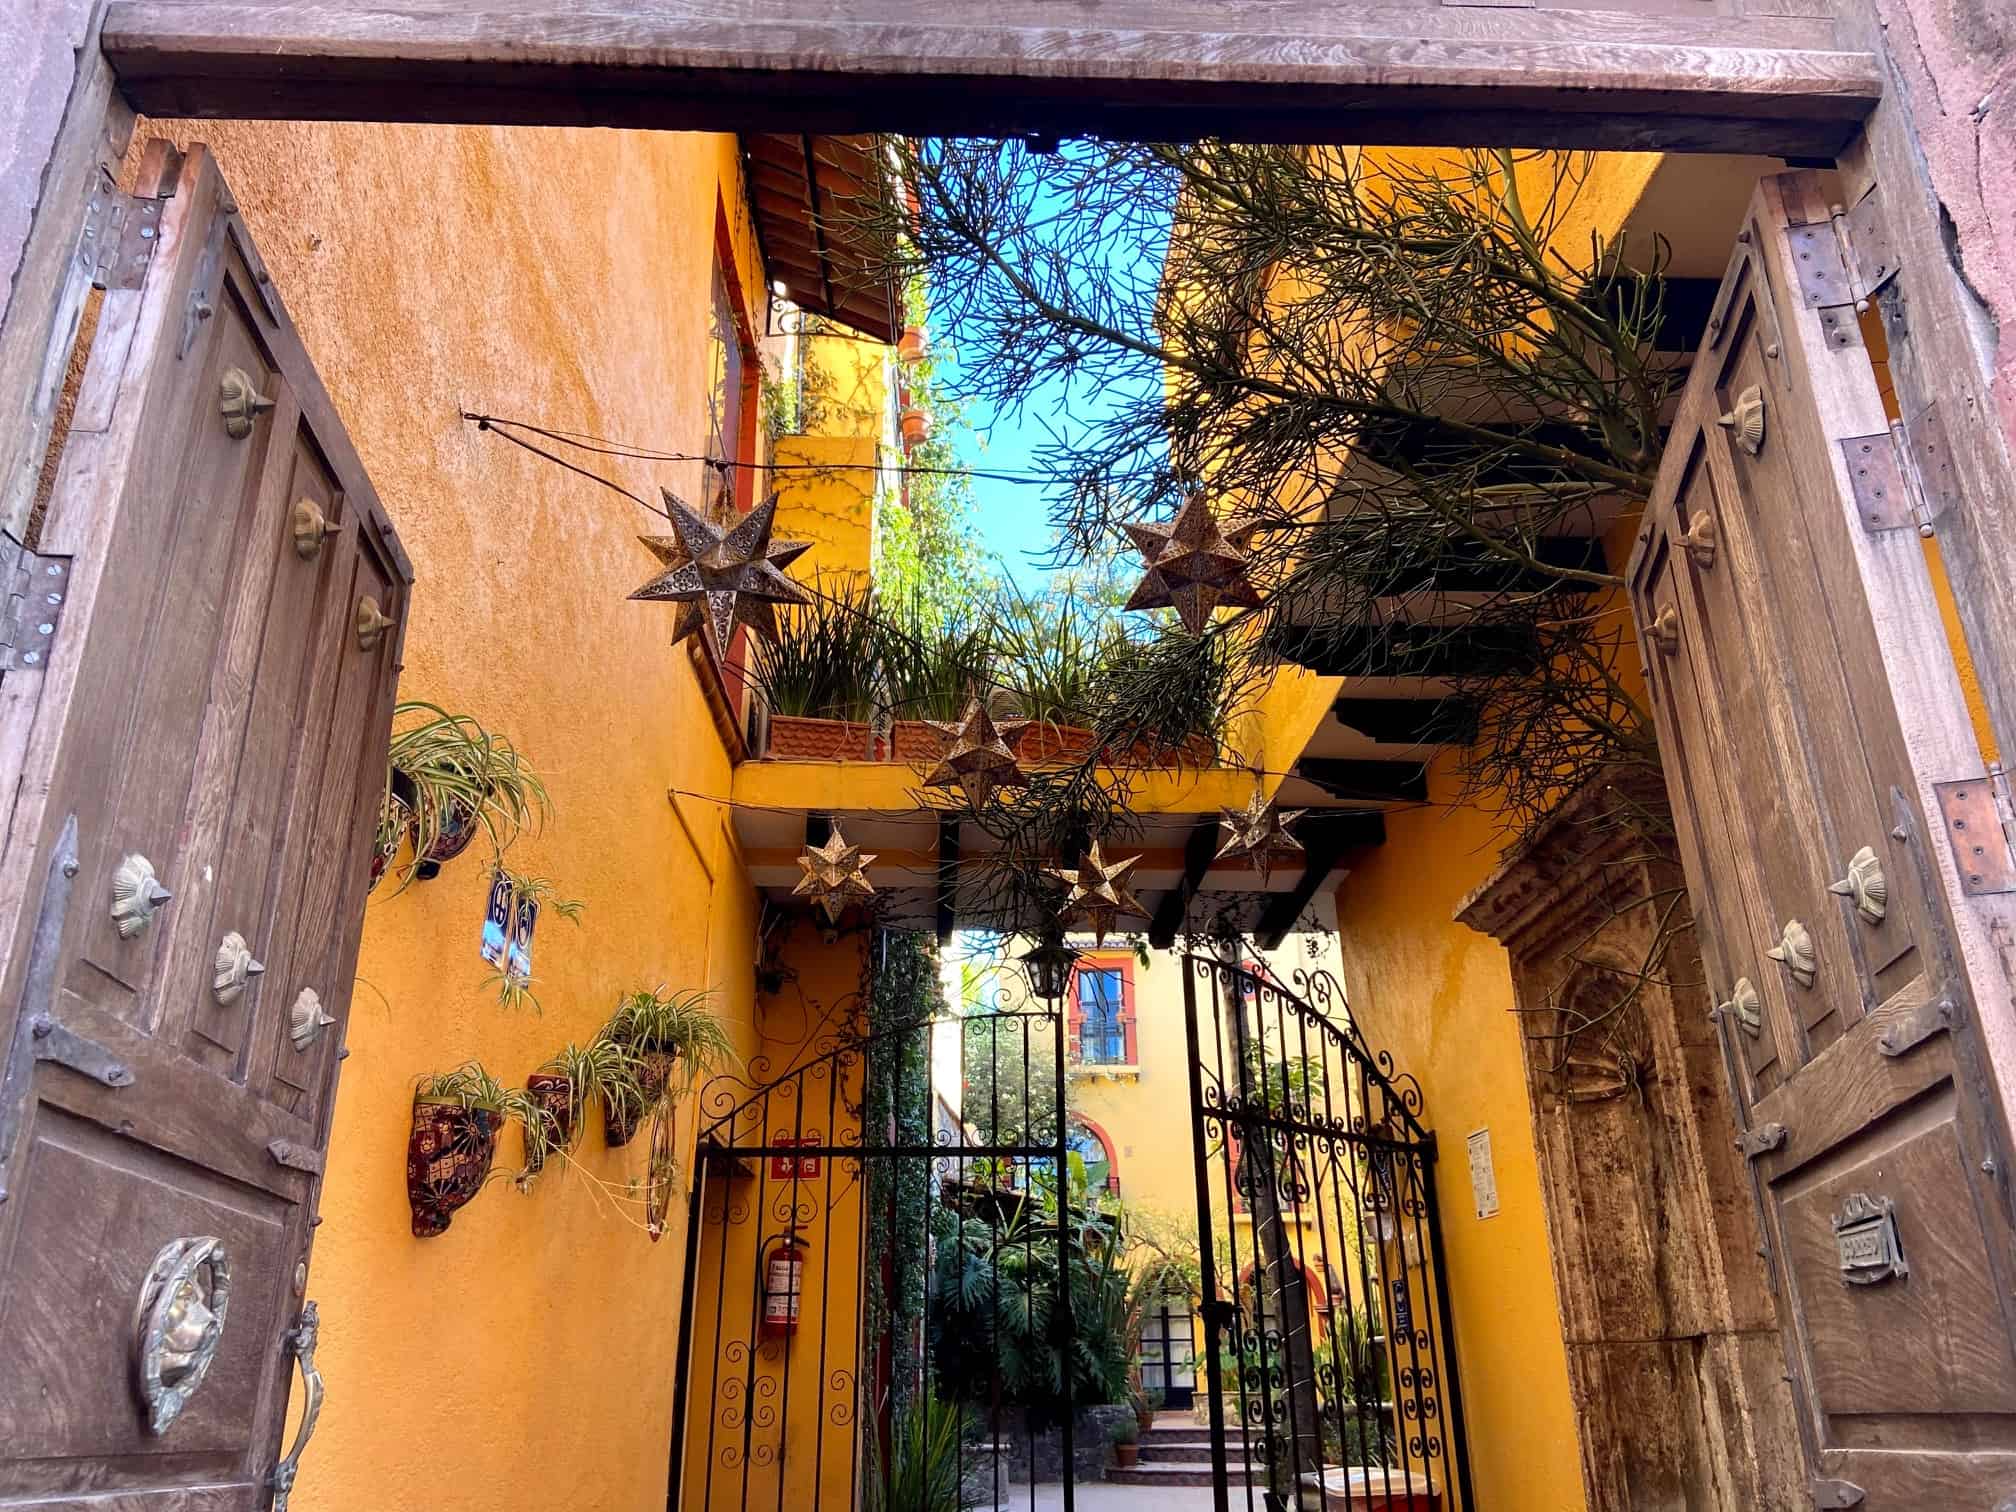 Best things to do in San Miguel de Allende Mexico - entrance to inner courtyard of a home